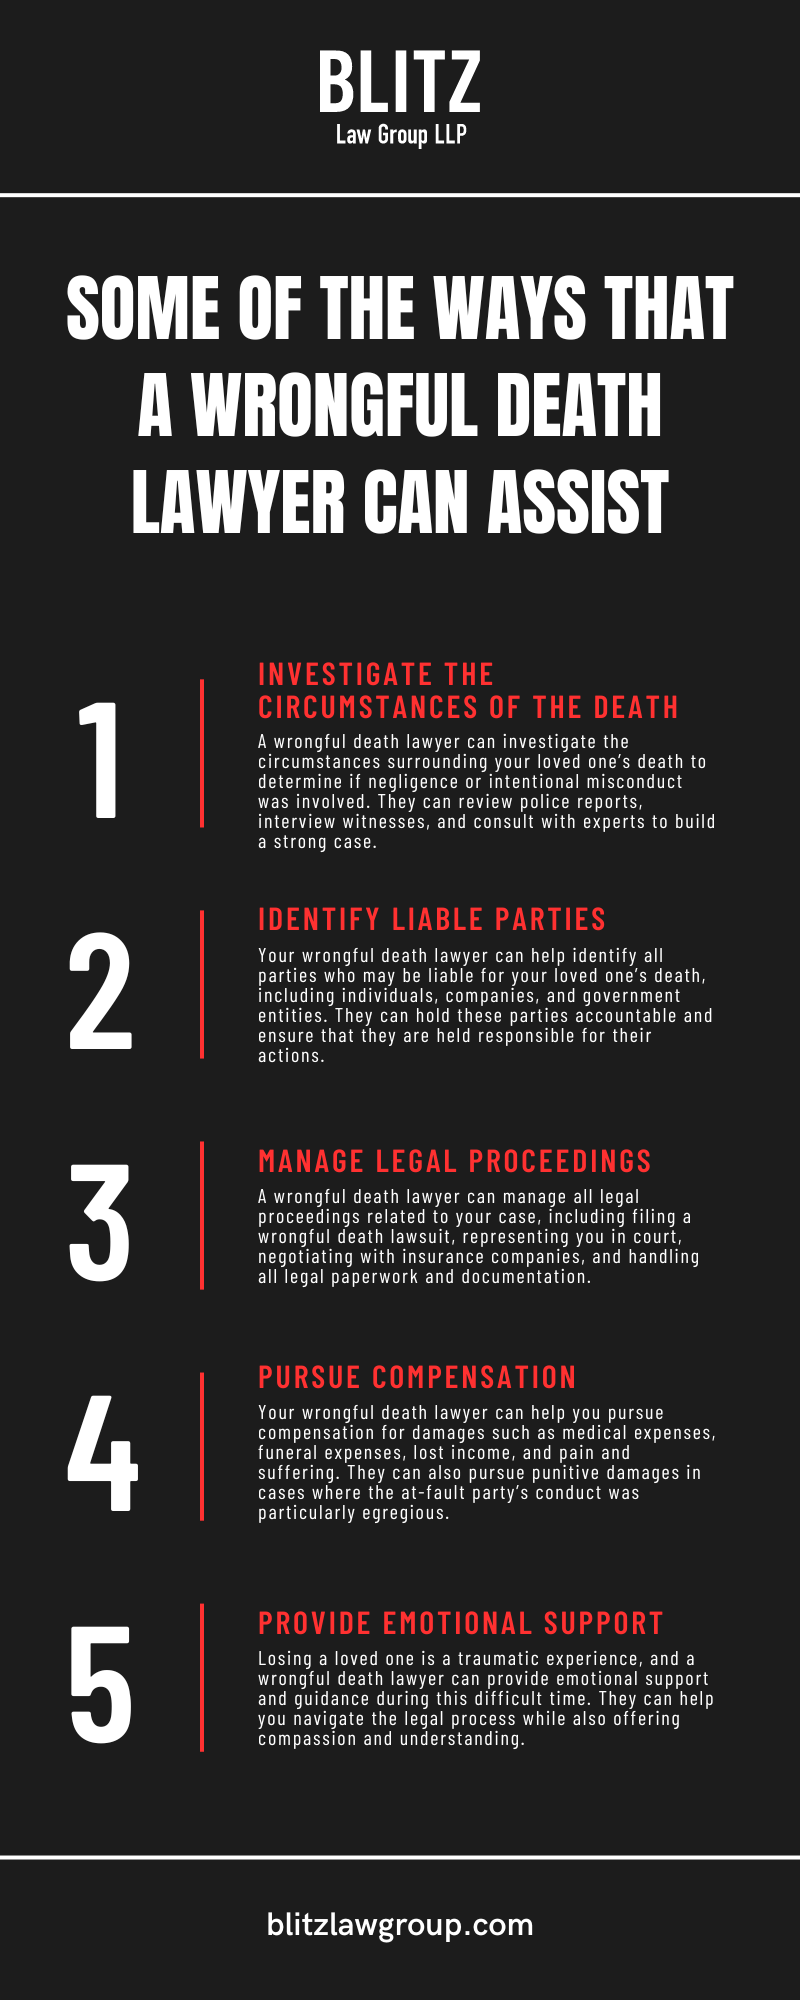 SOME OF THE WAYS THAT A WRONGFUL DEATH LAWYER CAN ASSIST YOU